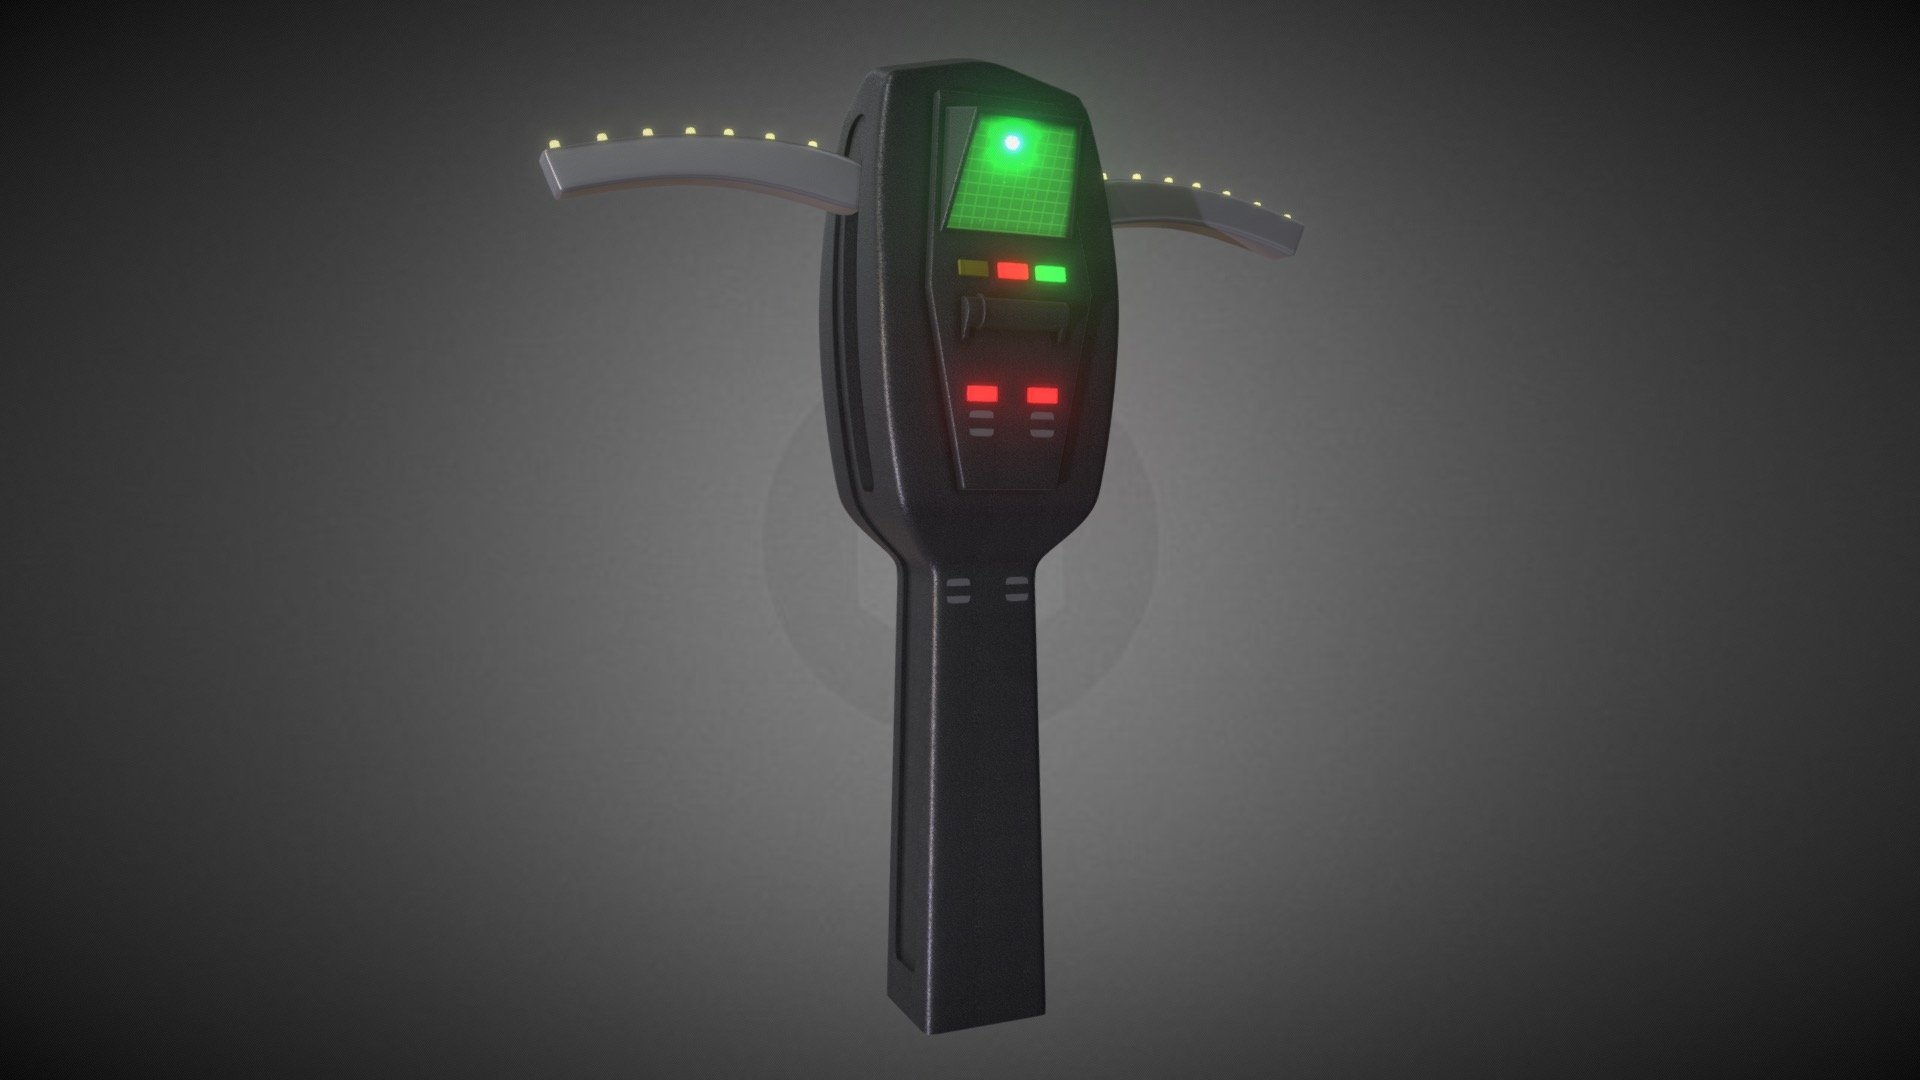 After all the Ghostbusters models I have been making recently I saved the best for last. Here's my PKE meter. This asset will most likely go in my final firehouse scene. Modelled and textured in 3DS Max in under 3 hours.

Thanks for looking :) - PKE Meter - 3D model by paulelderdesign 3d model